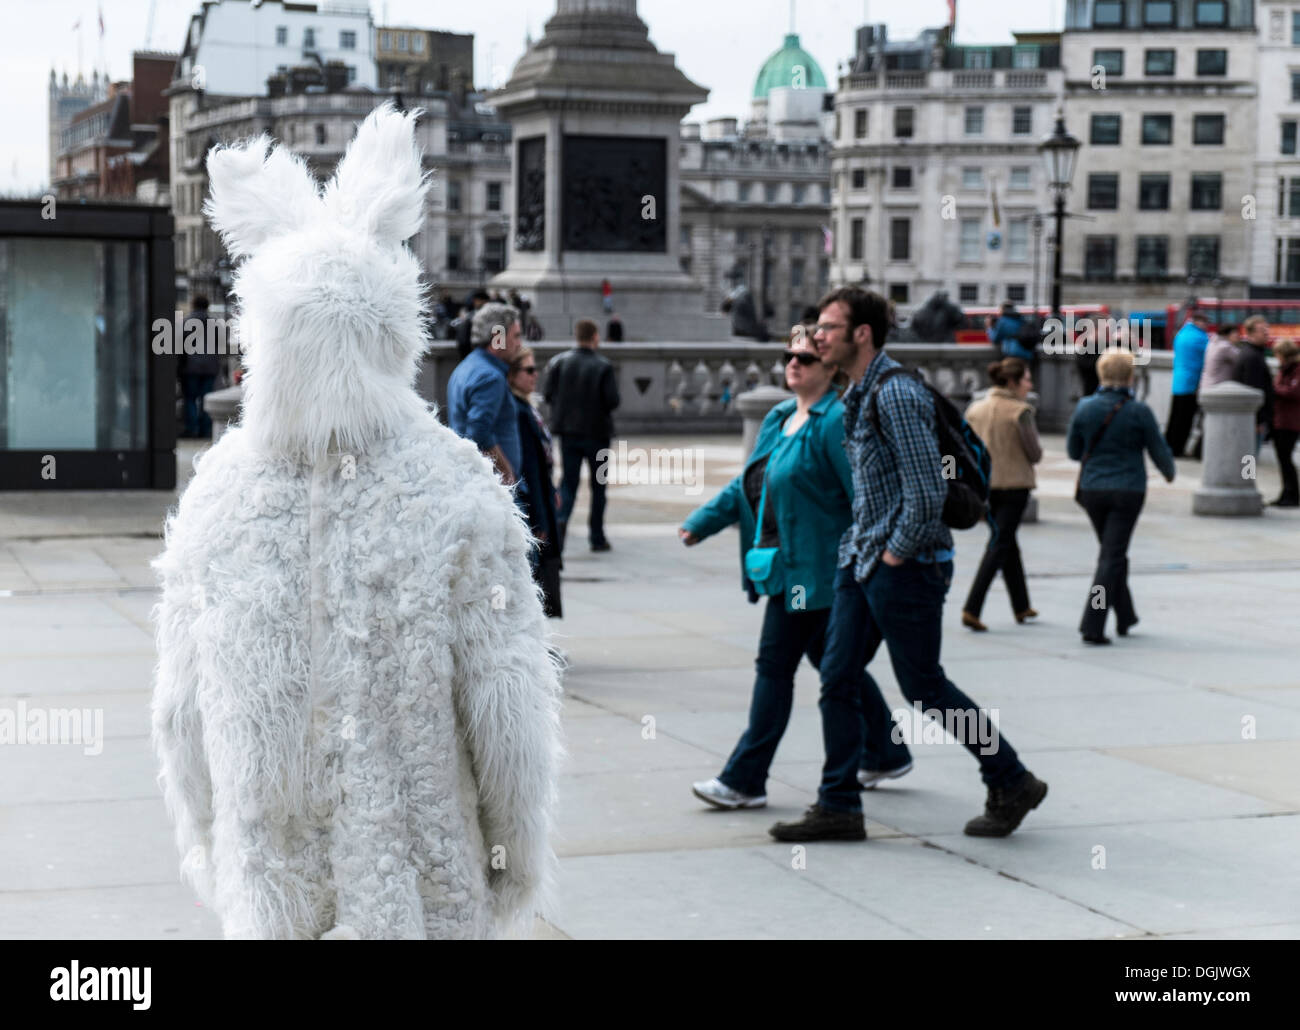 A man dressed as a white rabbit being ignored by people in Trafalgar Square. Stock Photo